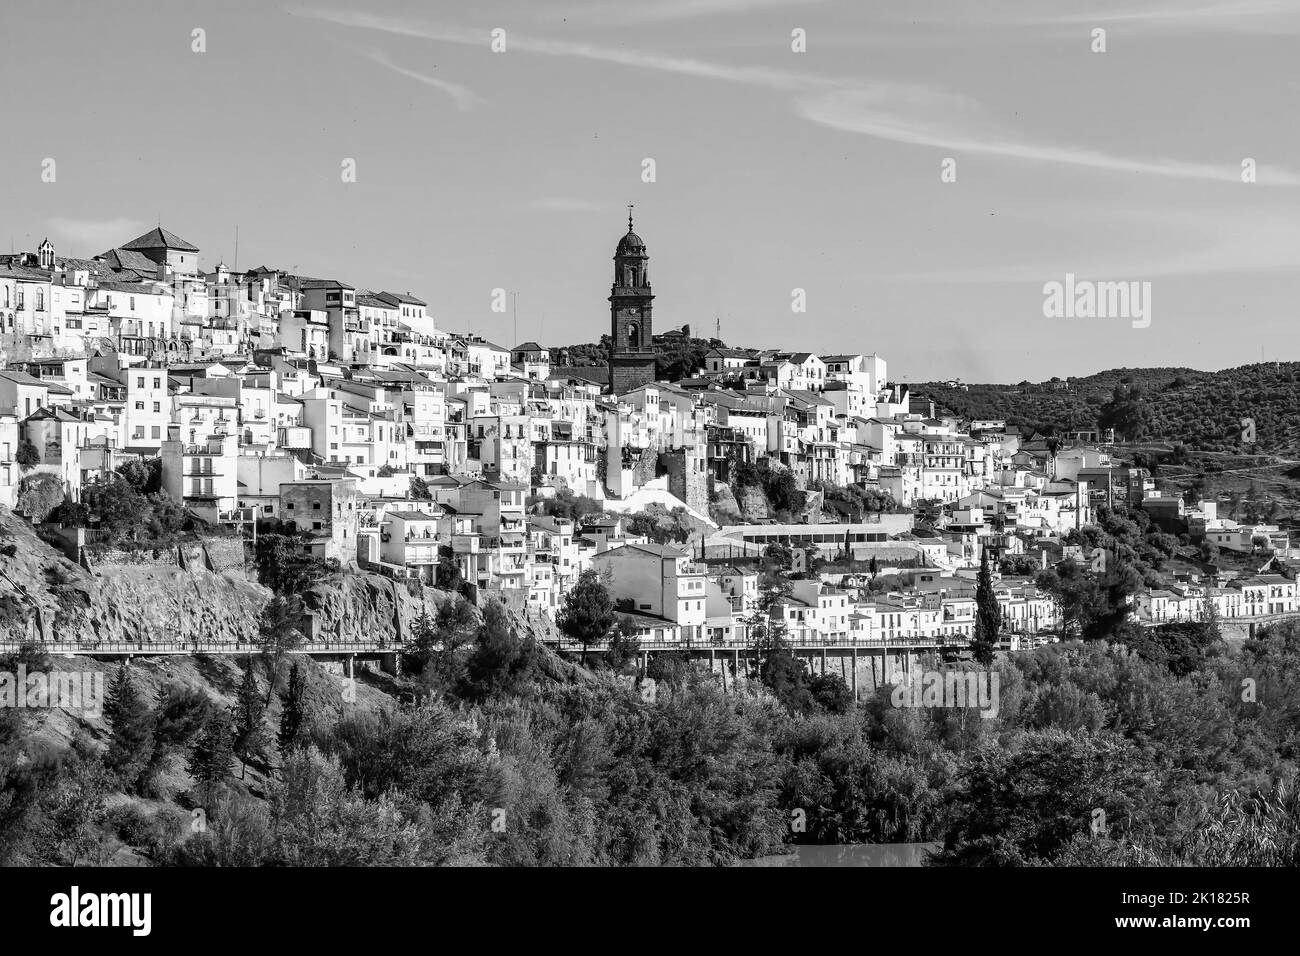 View of Montoro village, a city and municipality in the Cordoba Province, Spain, in the autonomous community of Andalusia. In Black and White Stock Photo